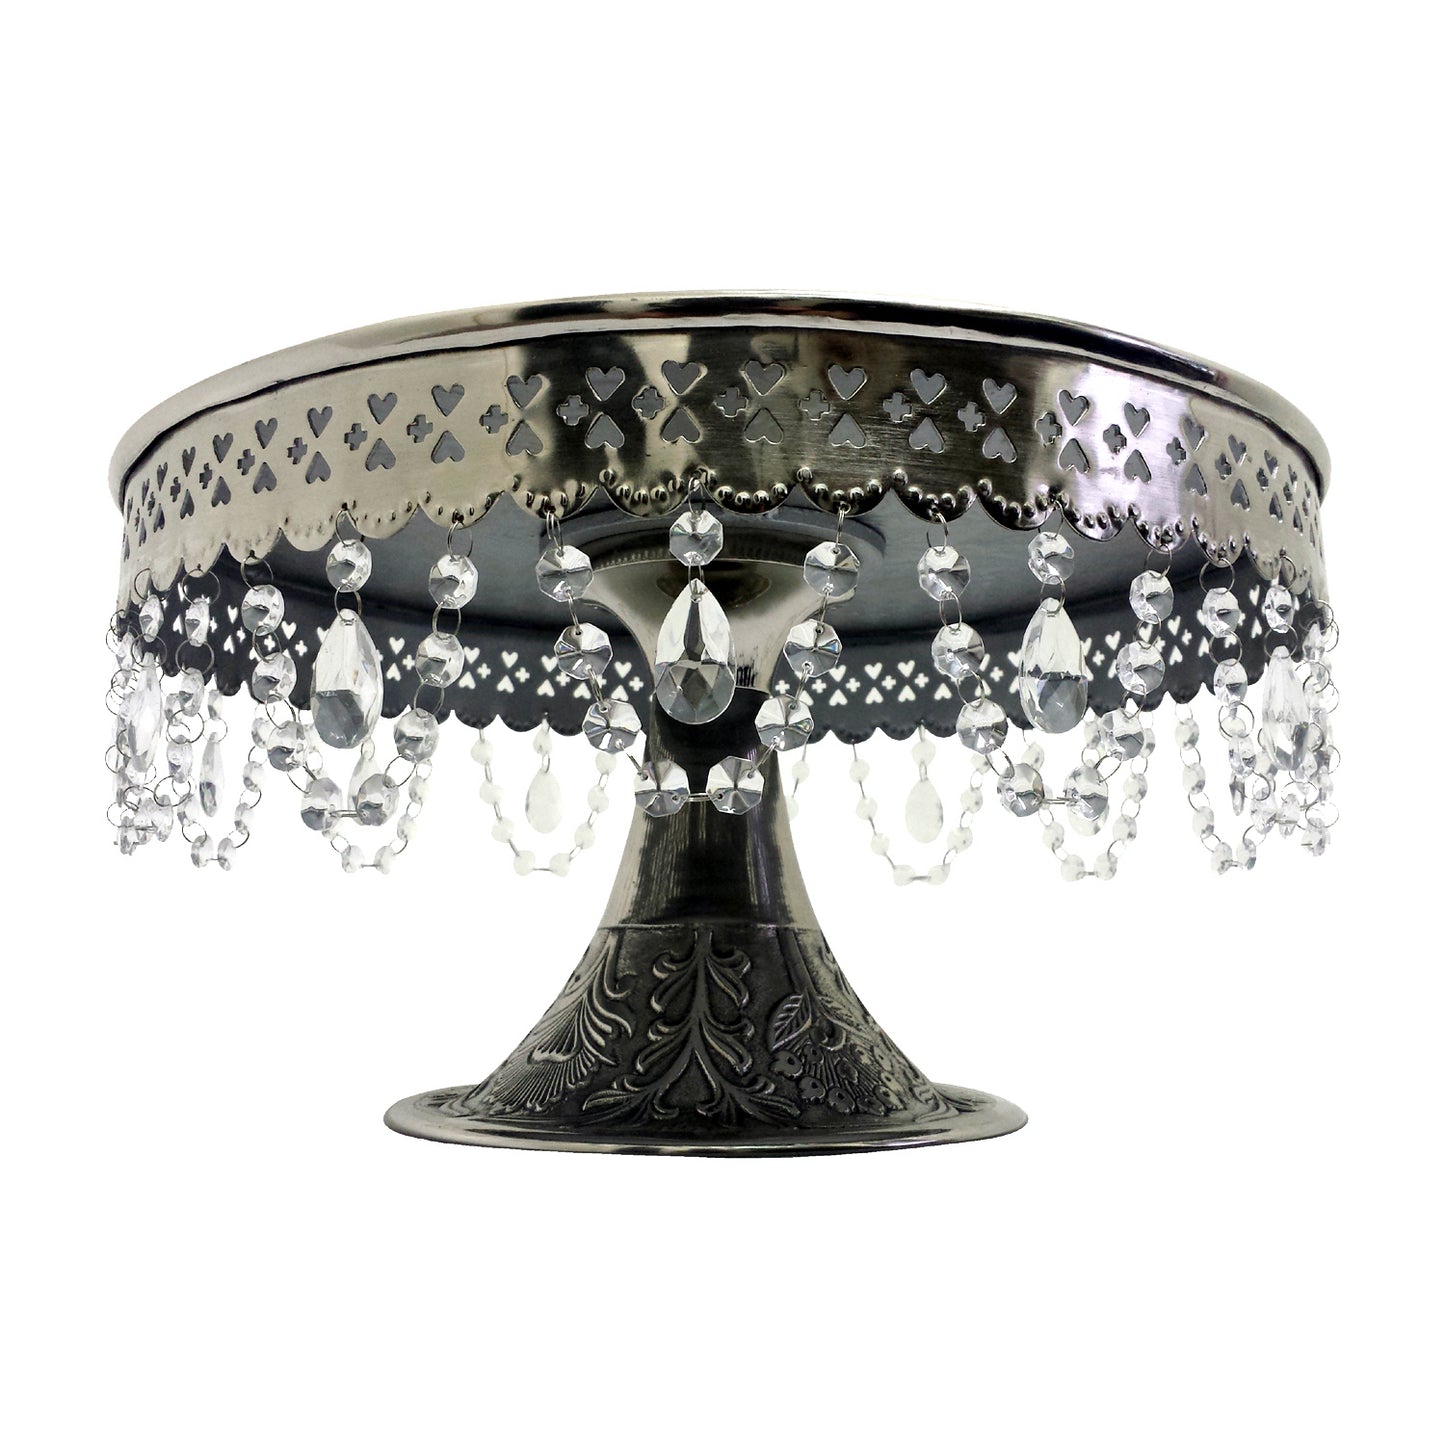 GiftBay Creations® Pedestal Cake Stand Silver, 14" with Clear Crystals